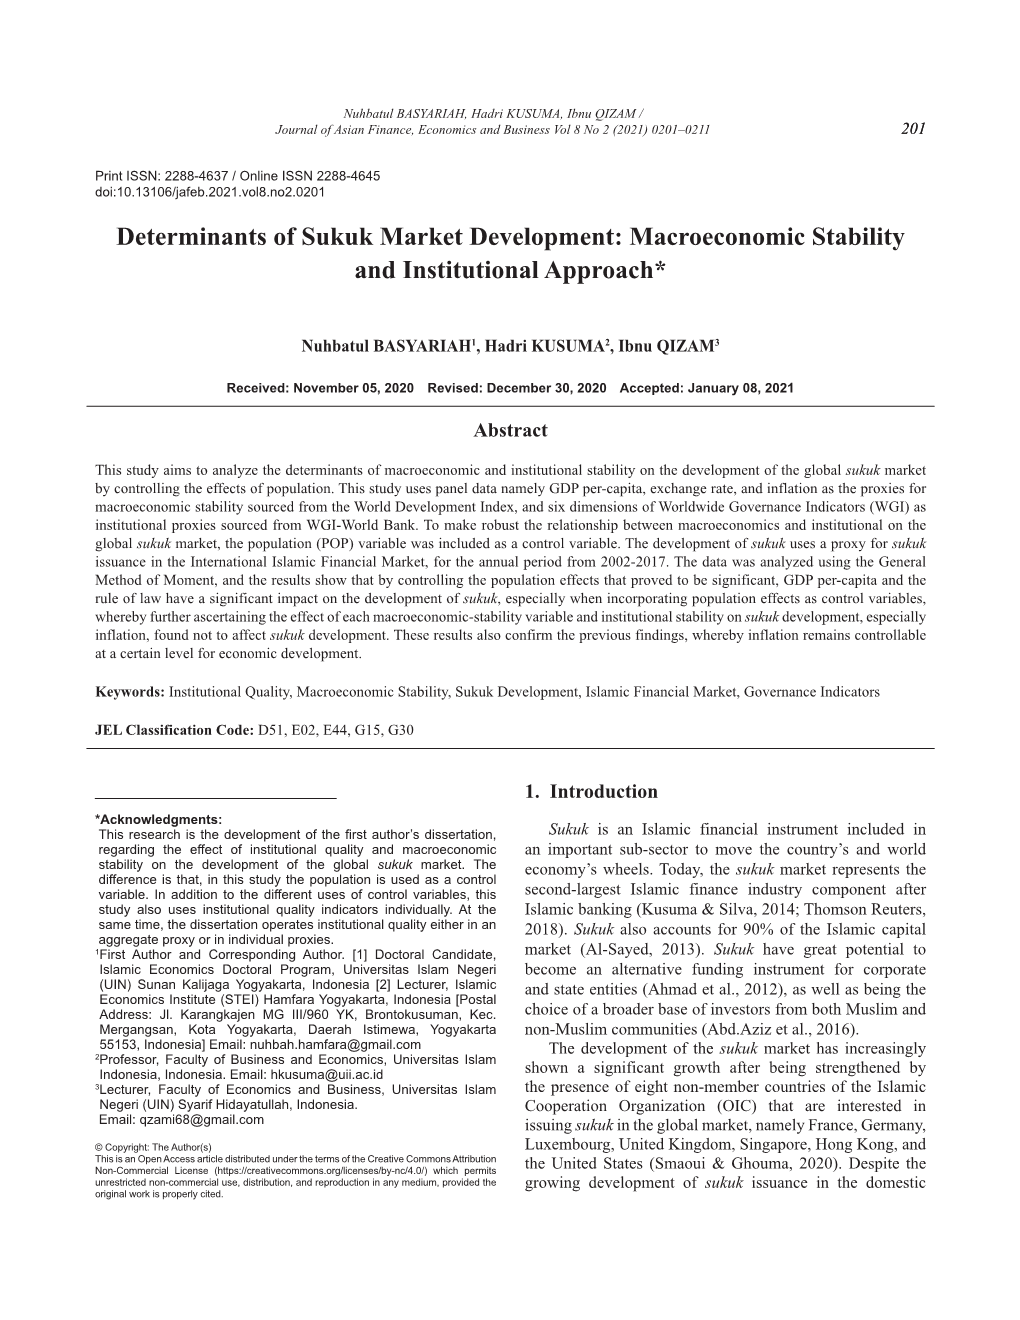 Determinants of Sukuk Market Development: Macroeconomic Stability and Institutional Approach*